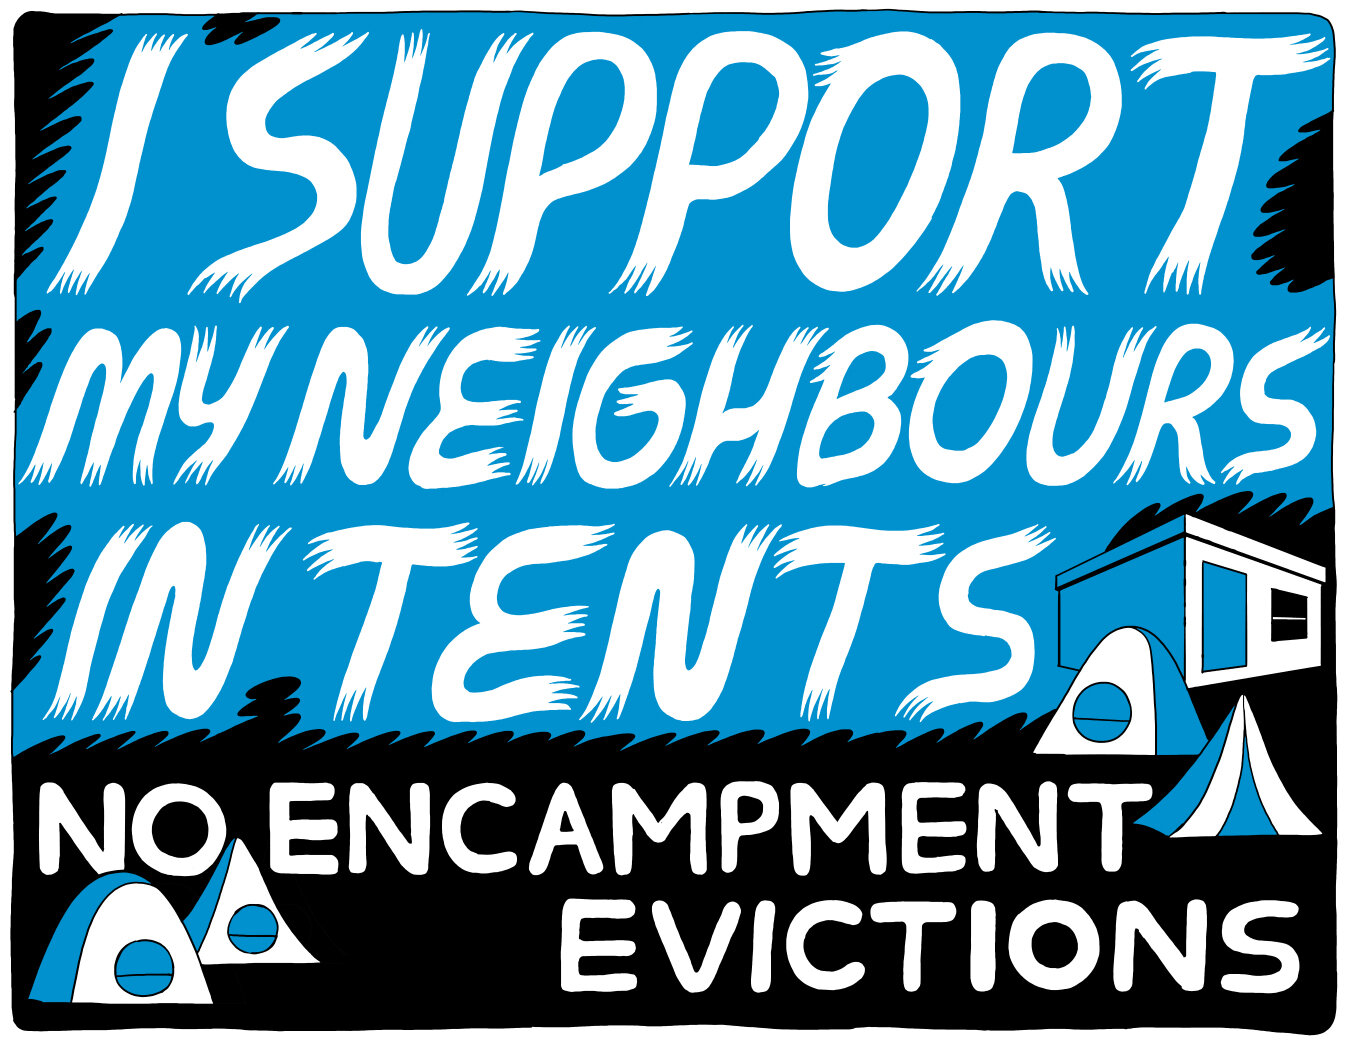 "I Support My Neighbours In Tents"